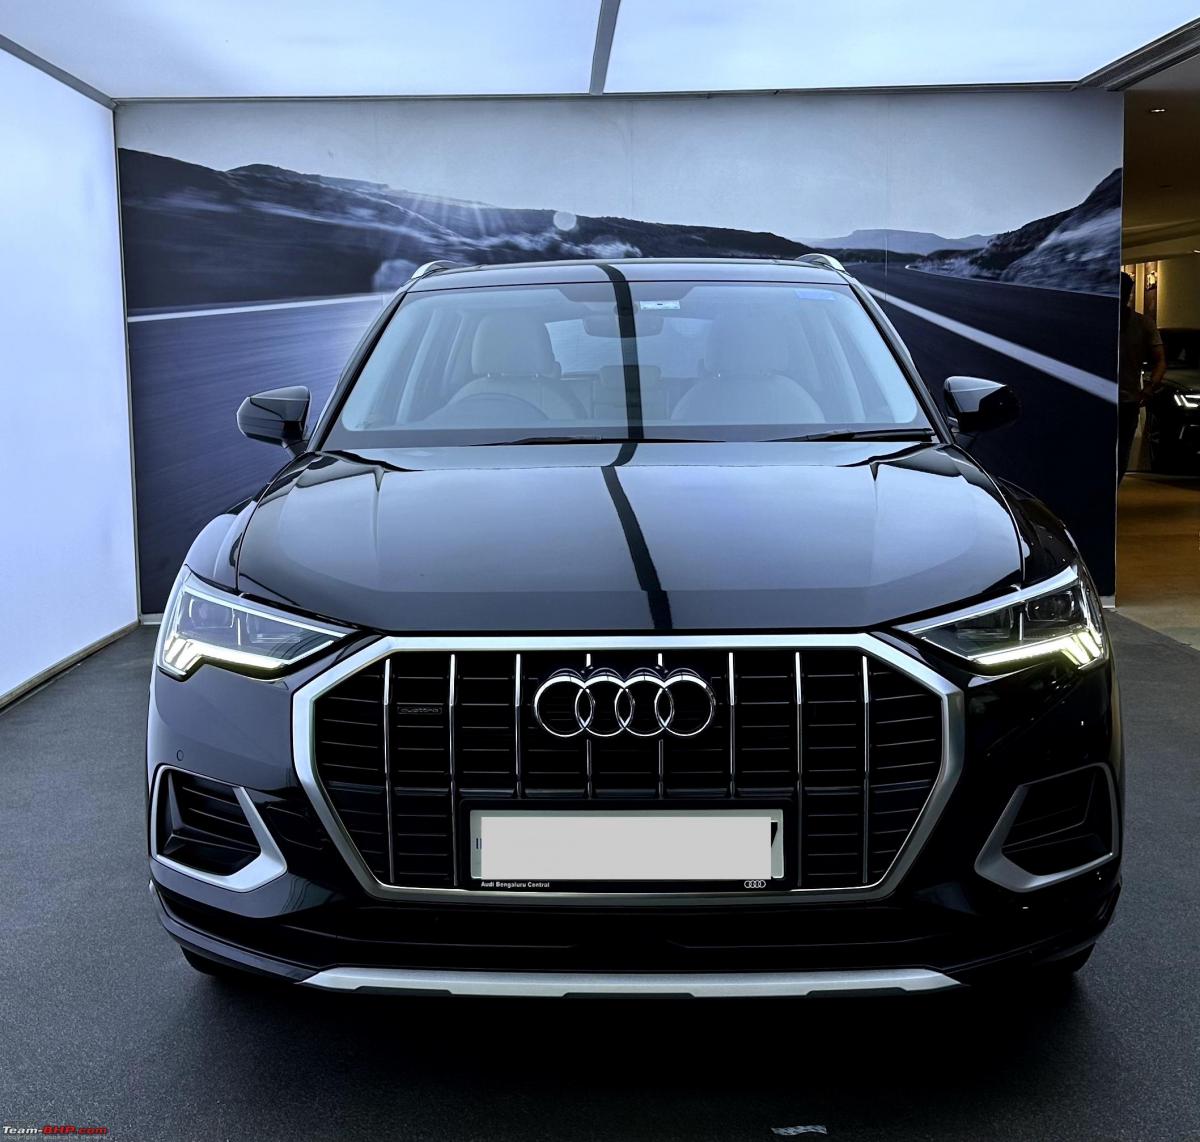 Upgraded from a Kia Seltos to the 2023 Audi Q3: Initial impressions, Indian, Audi, Member Content, 2022 Audi Q3, Kia Selros